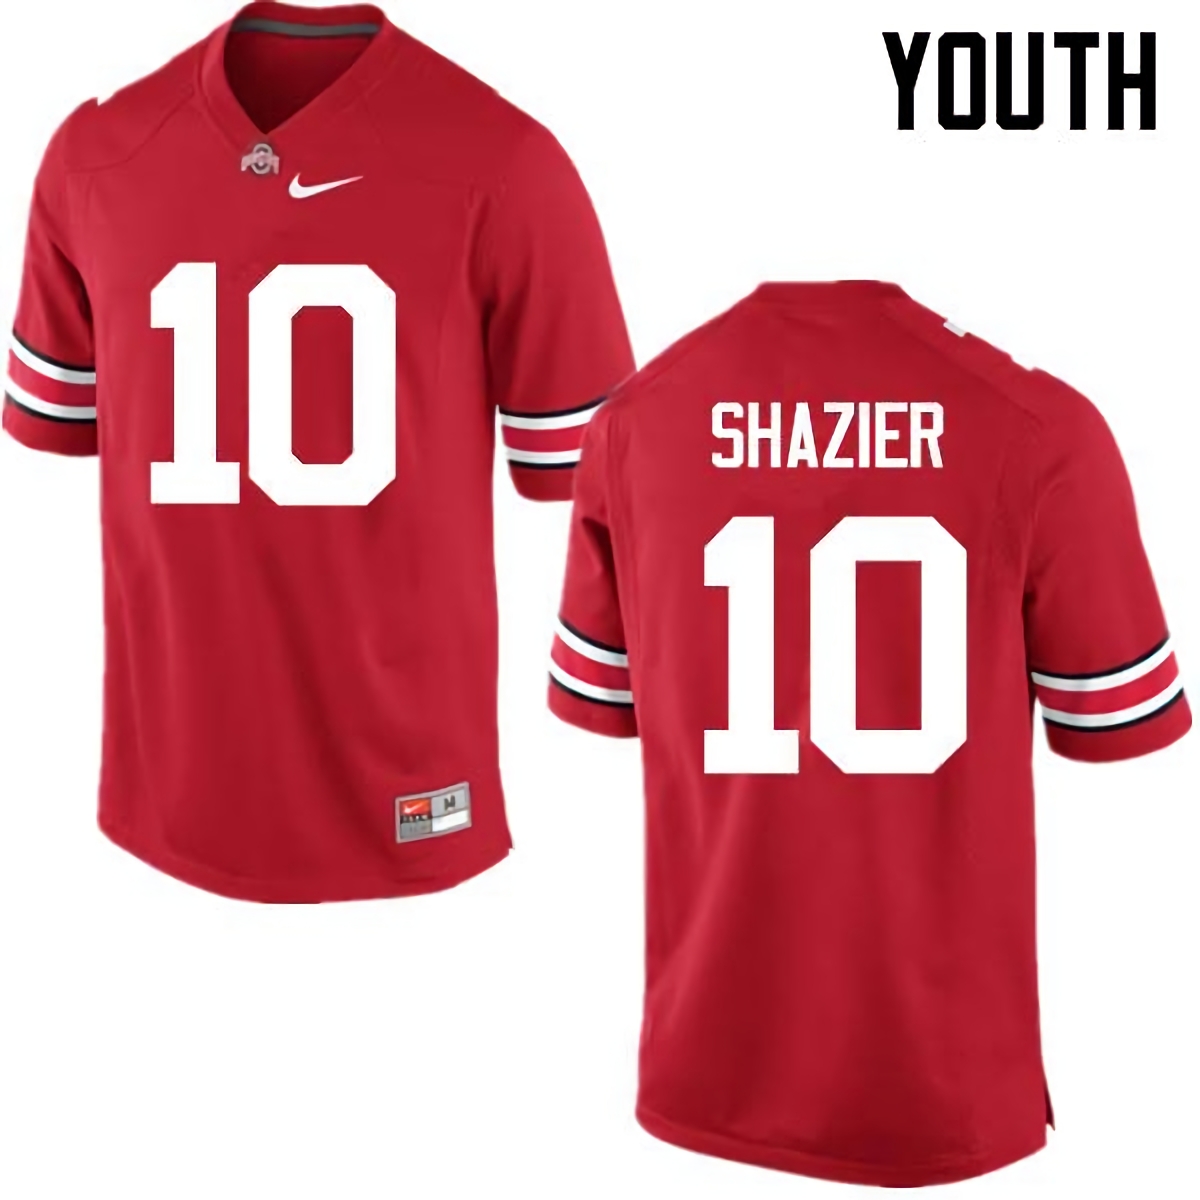 Ryan Shazier Ohio State Buckeyes Youth NCAA #10 Nike Red College Stitched Football Jersey UZI5056TR